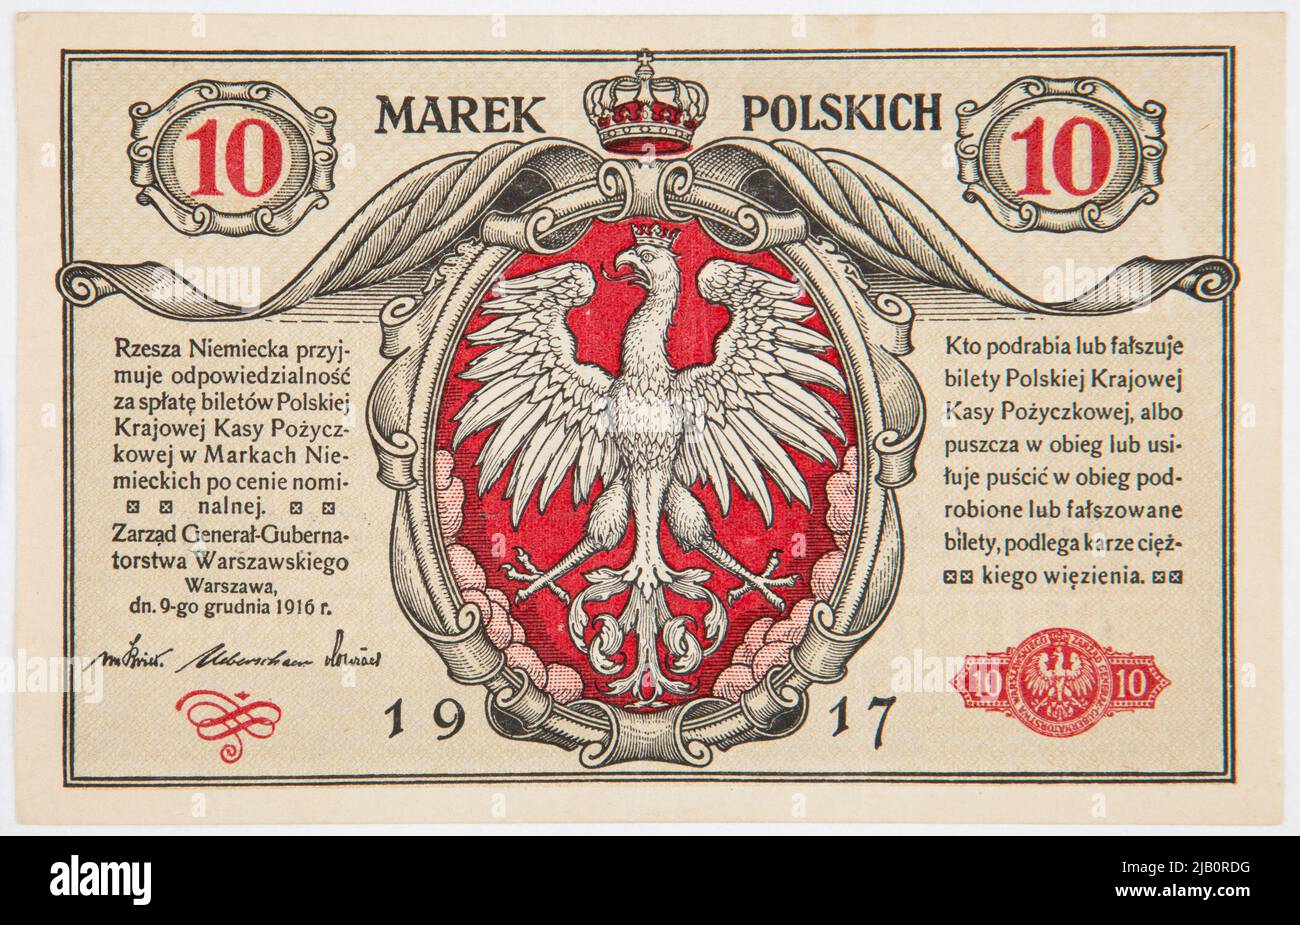 Banking for 10 Polish brands, Board of the Warsaw Government General, Polish National Loan Fund, 09.12.1916/ 1917 Polish National Cash Register, Reichsdruckerei, Berlin Stock Photo